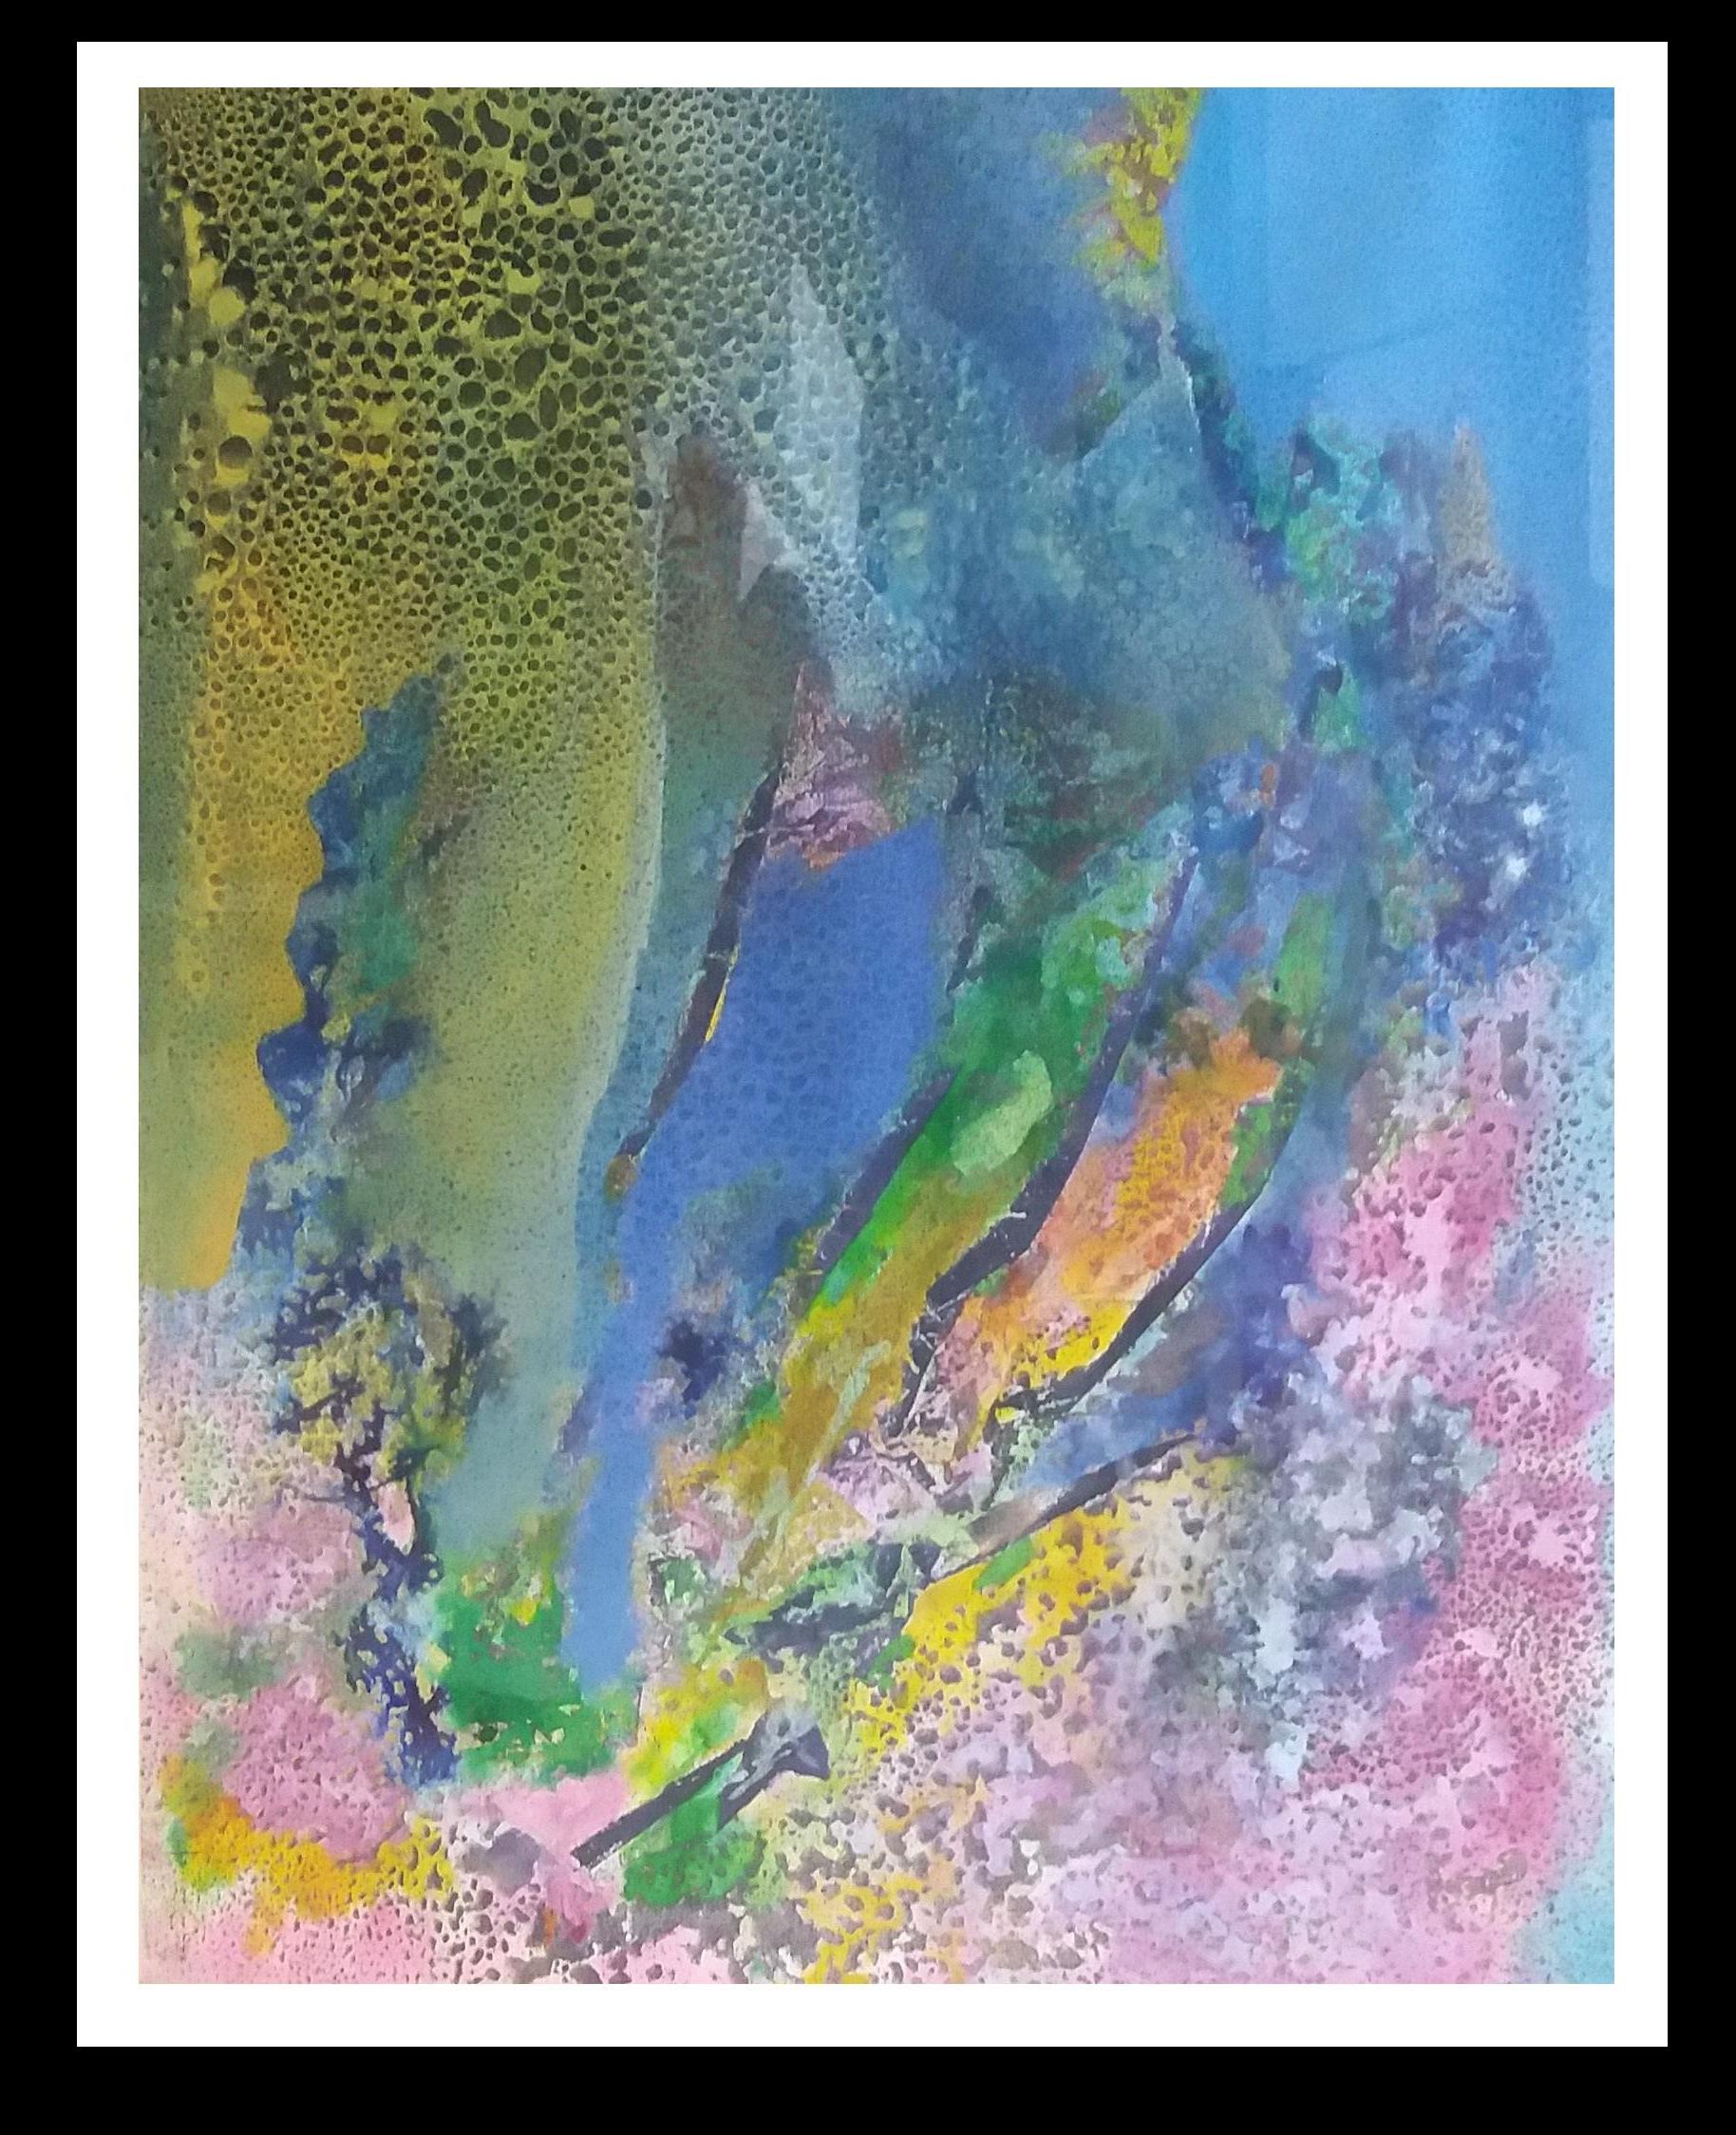  I. Cahue  Blue and Pink Drops abstract. original.acrylic paper painting - Painting by Isidro Cahue